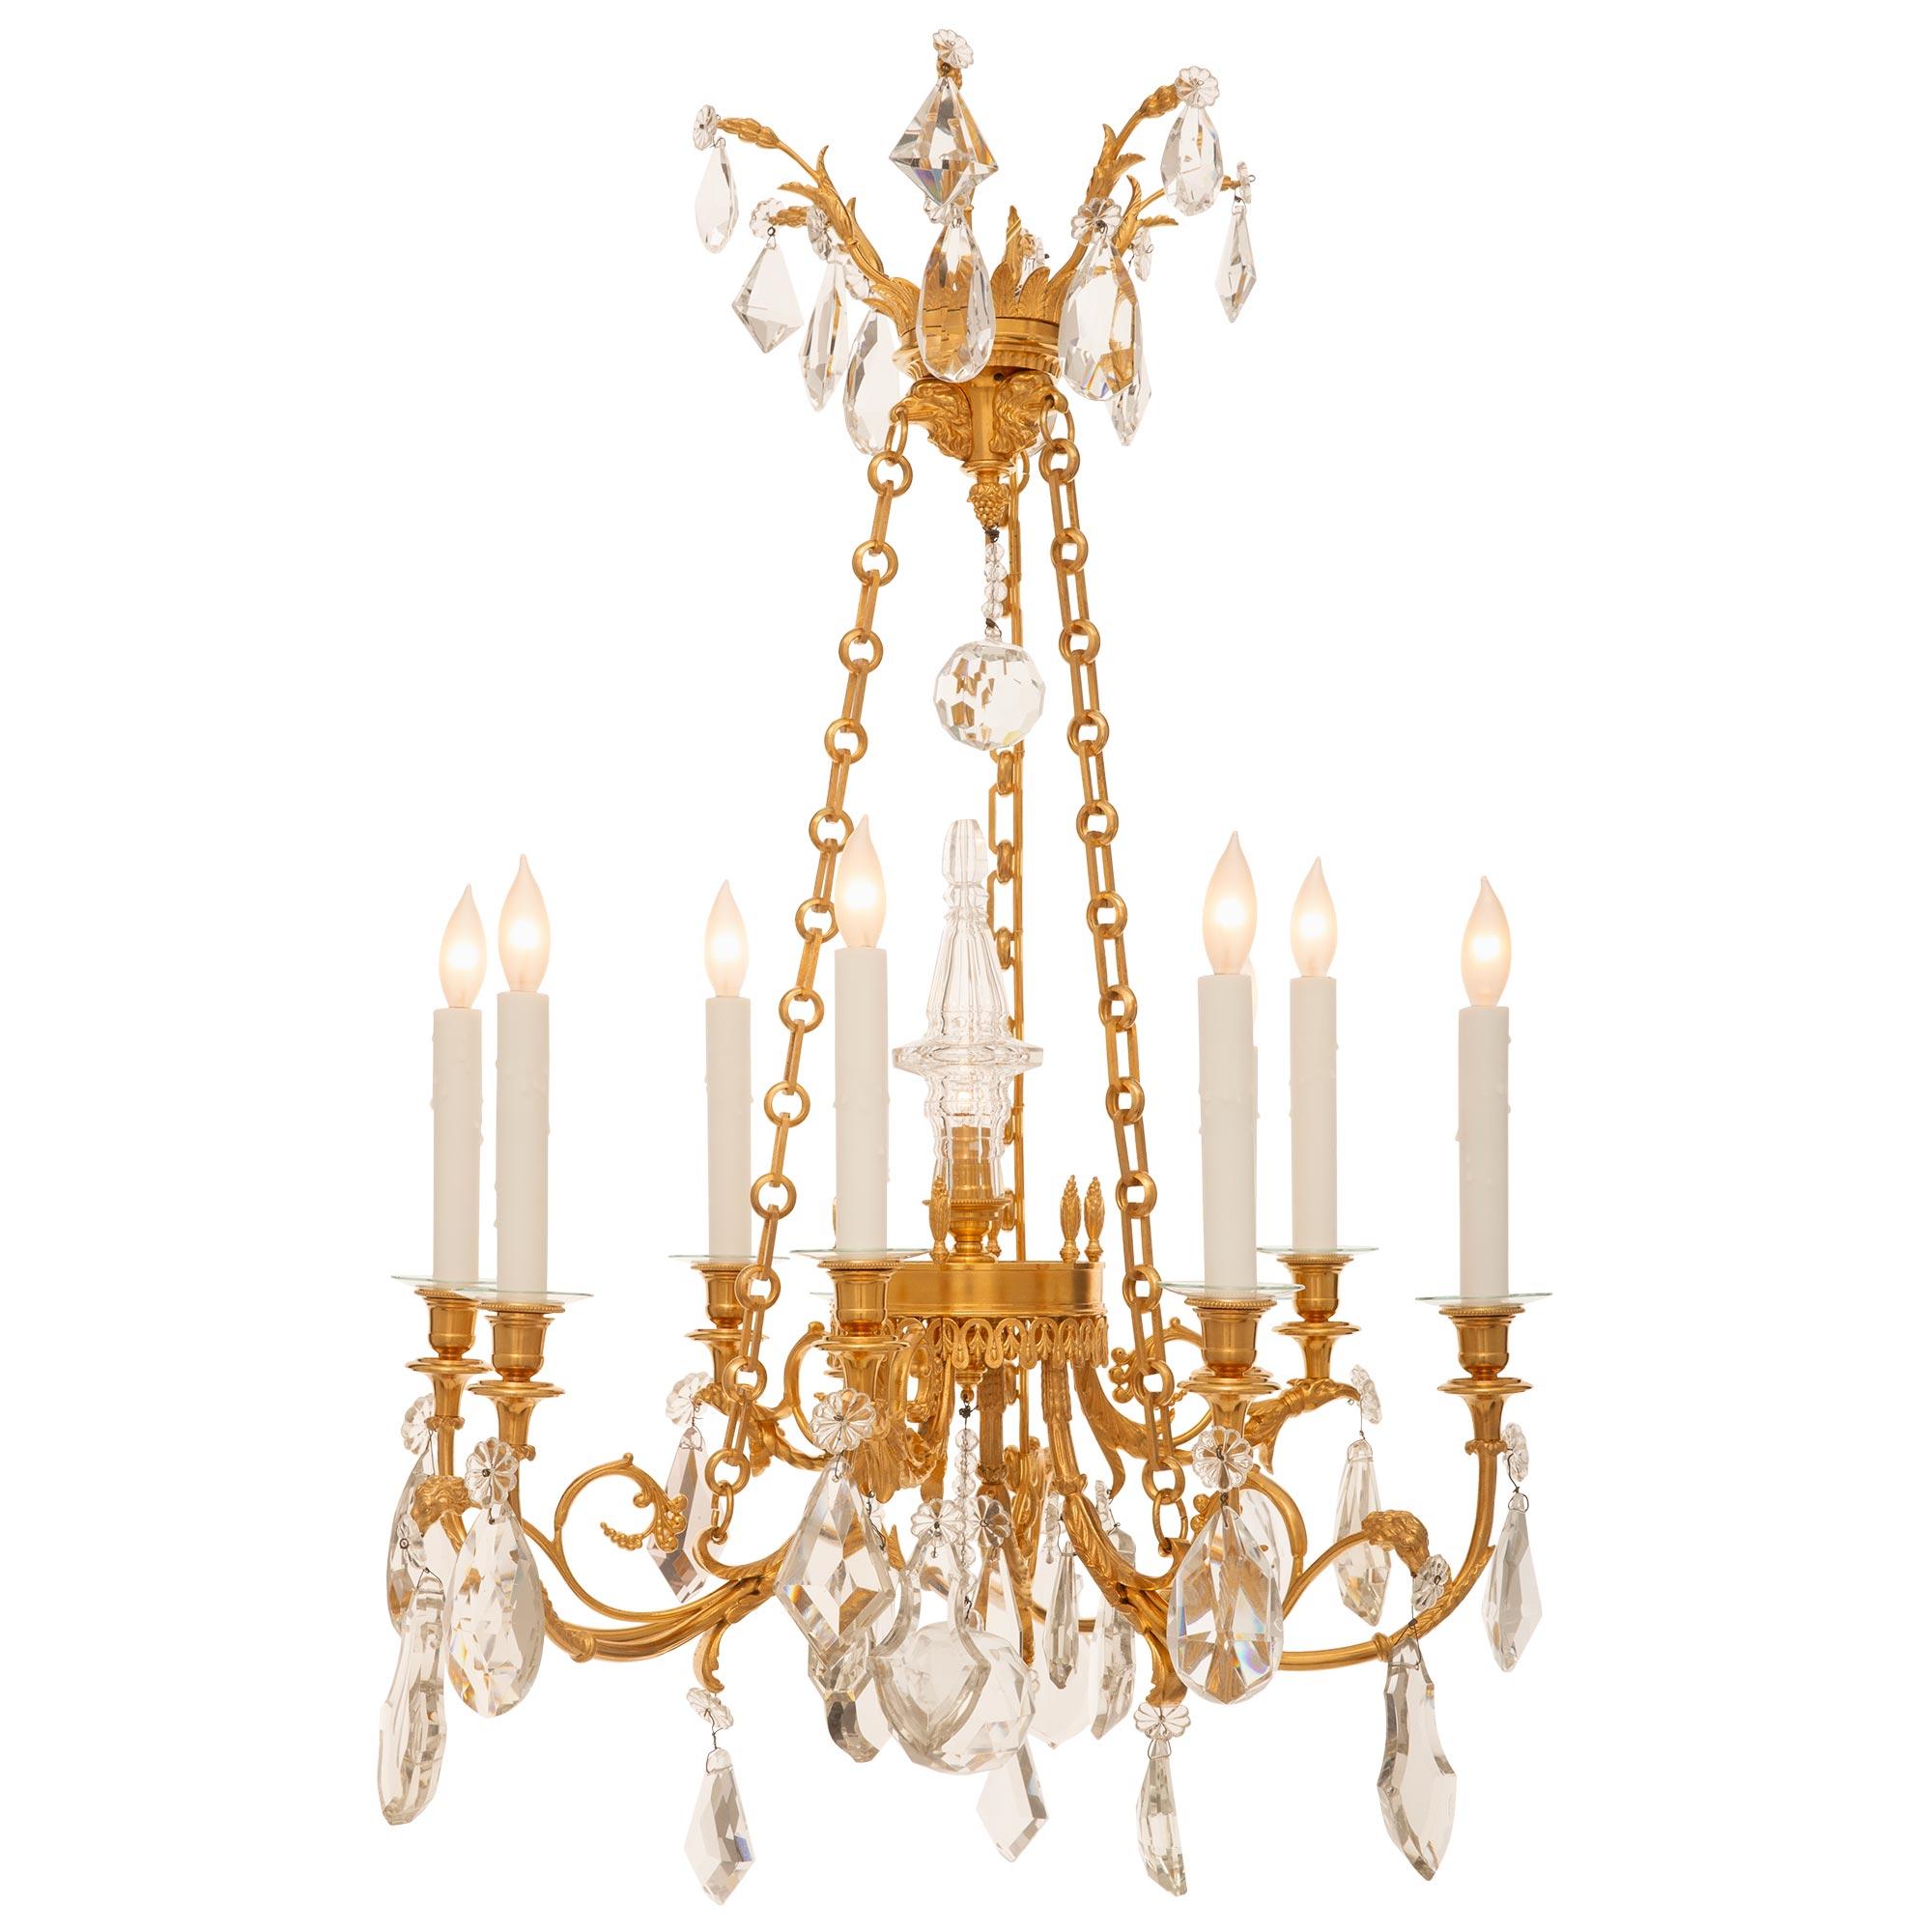 French 19th Century Belle Époque Period Ormolu And Baccarat Crystal Chandelier In Good Condition For Sale In West Palm Beach, FL